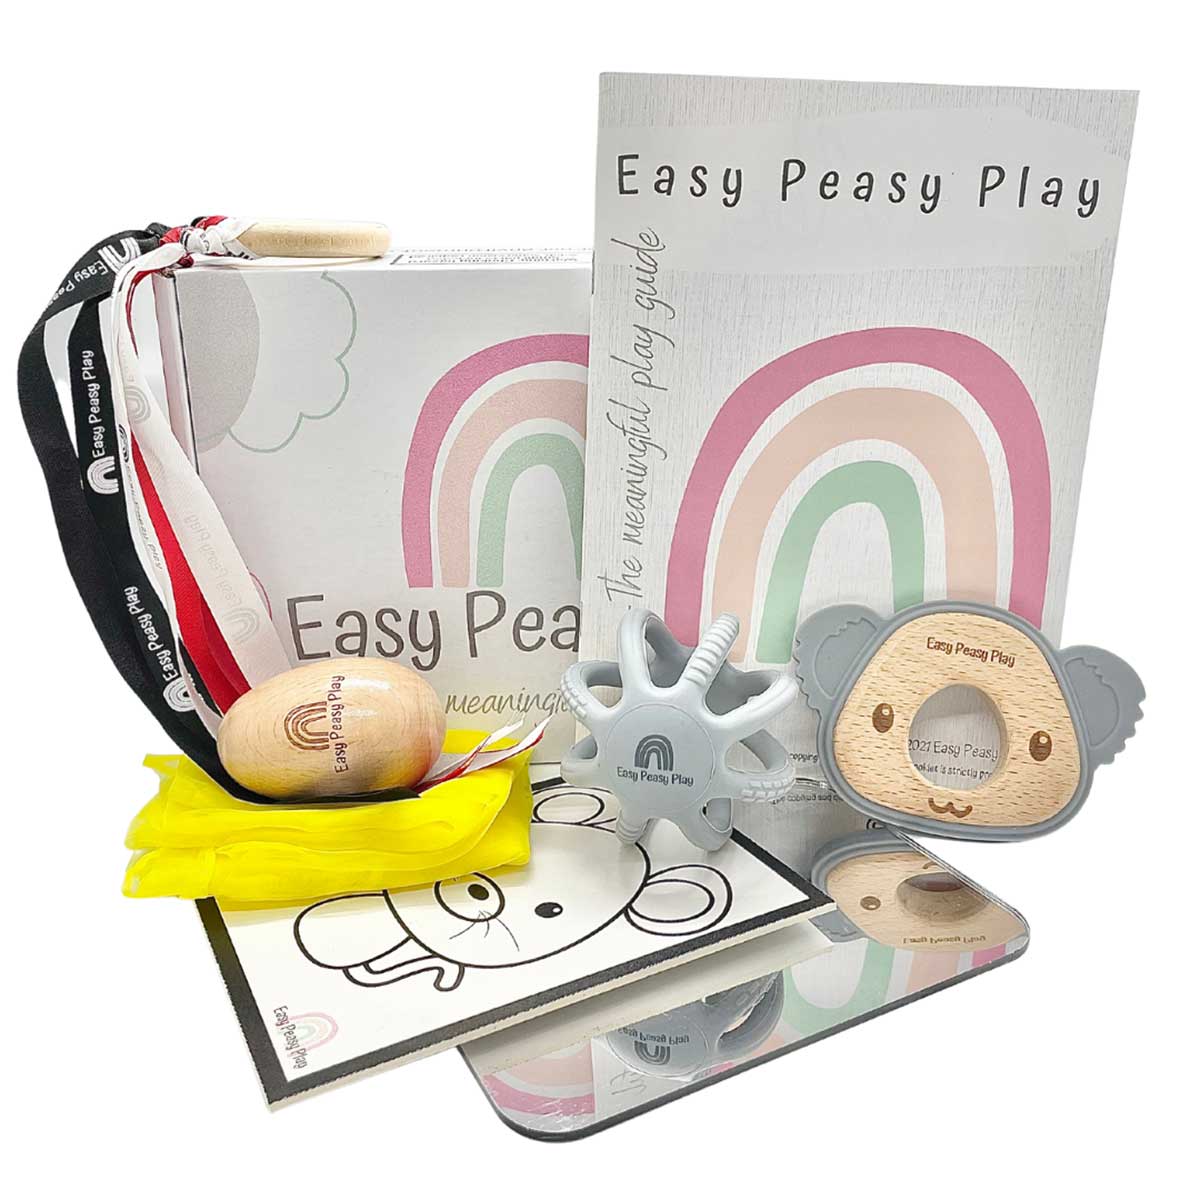 Meaningful Play Box from Easy Peasy Play